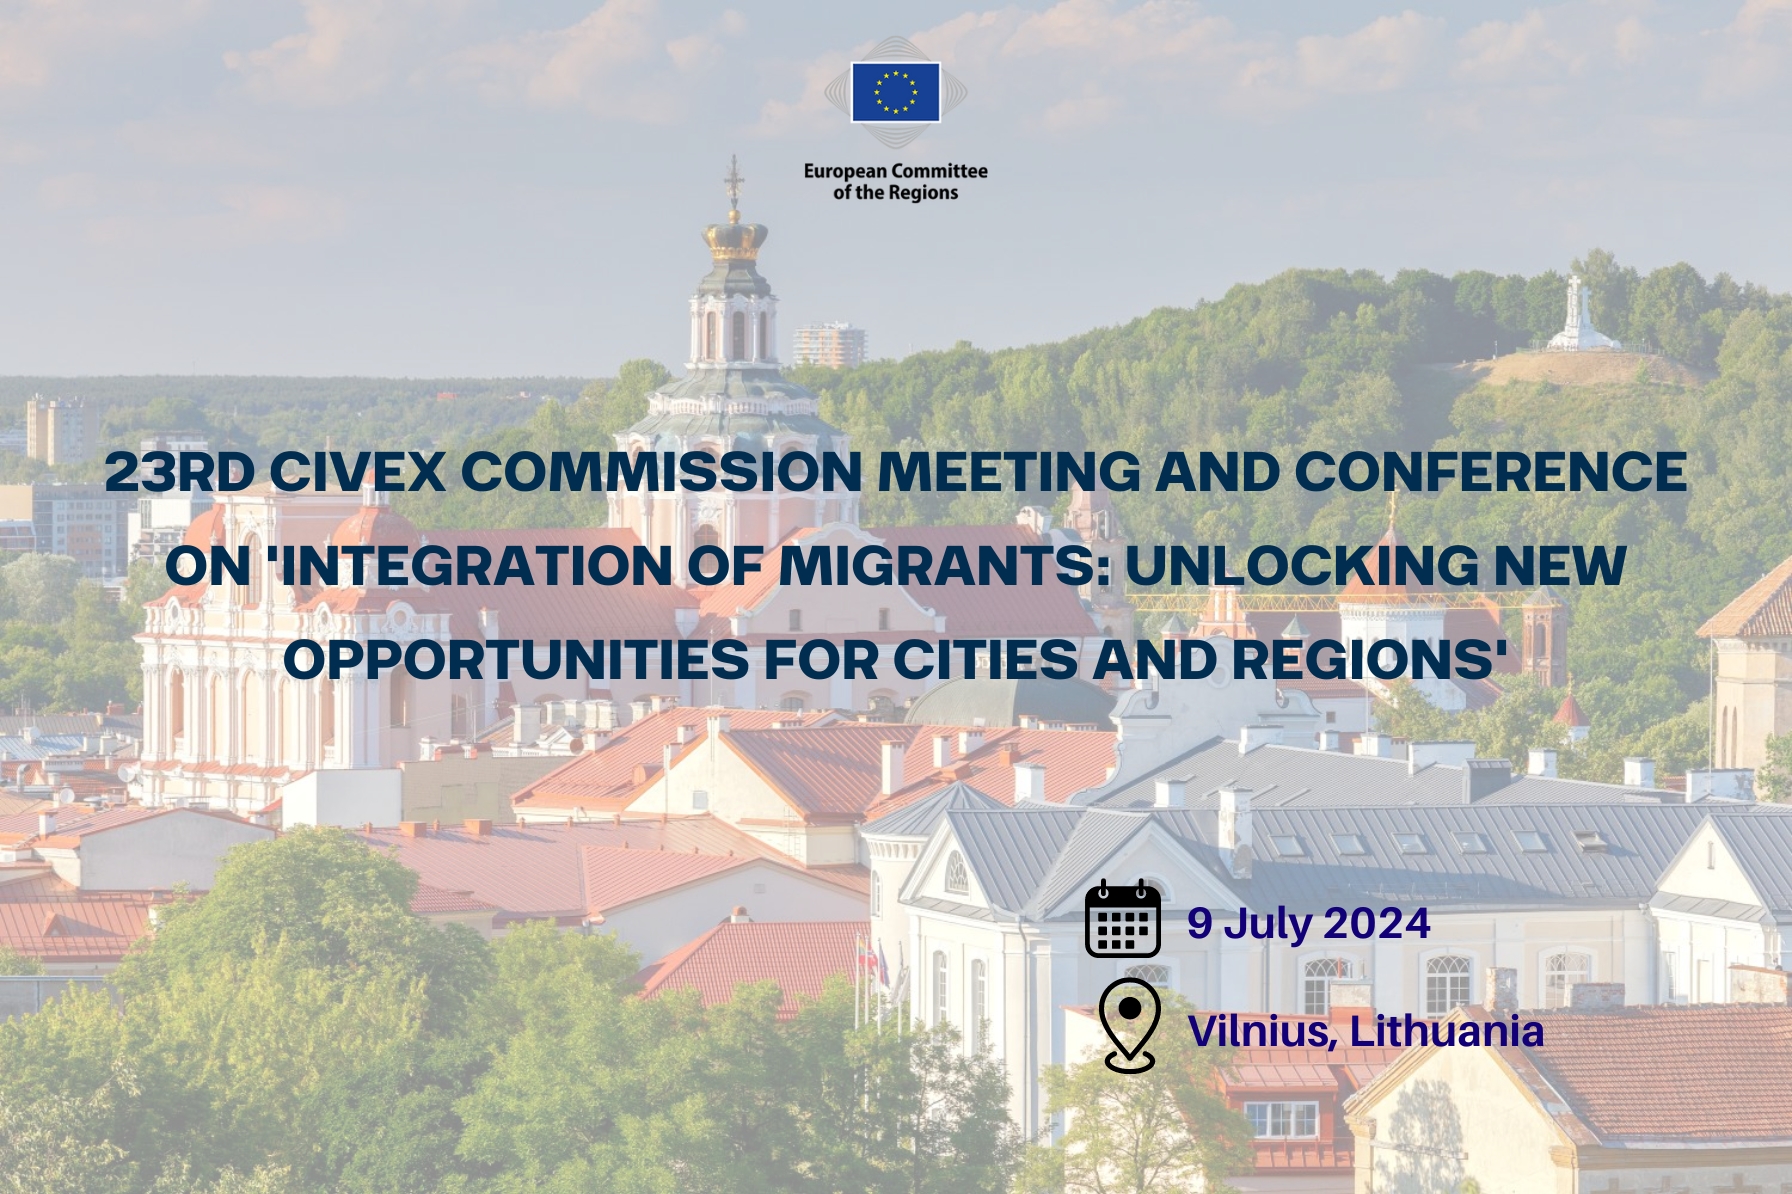 23rd CIVEX commission meeting and Conference on 'Integration of migrants: unlocking new opportunities for cities and regions'